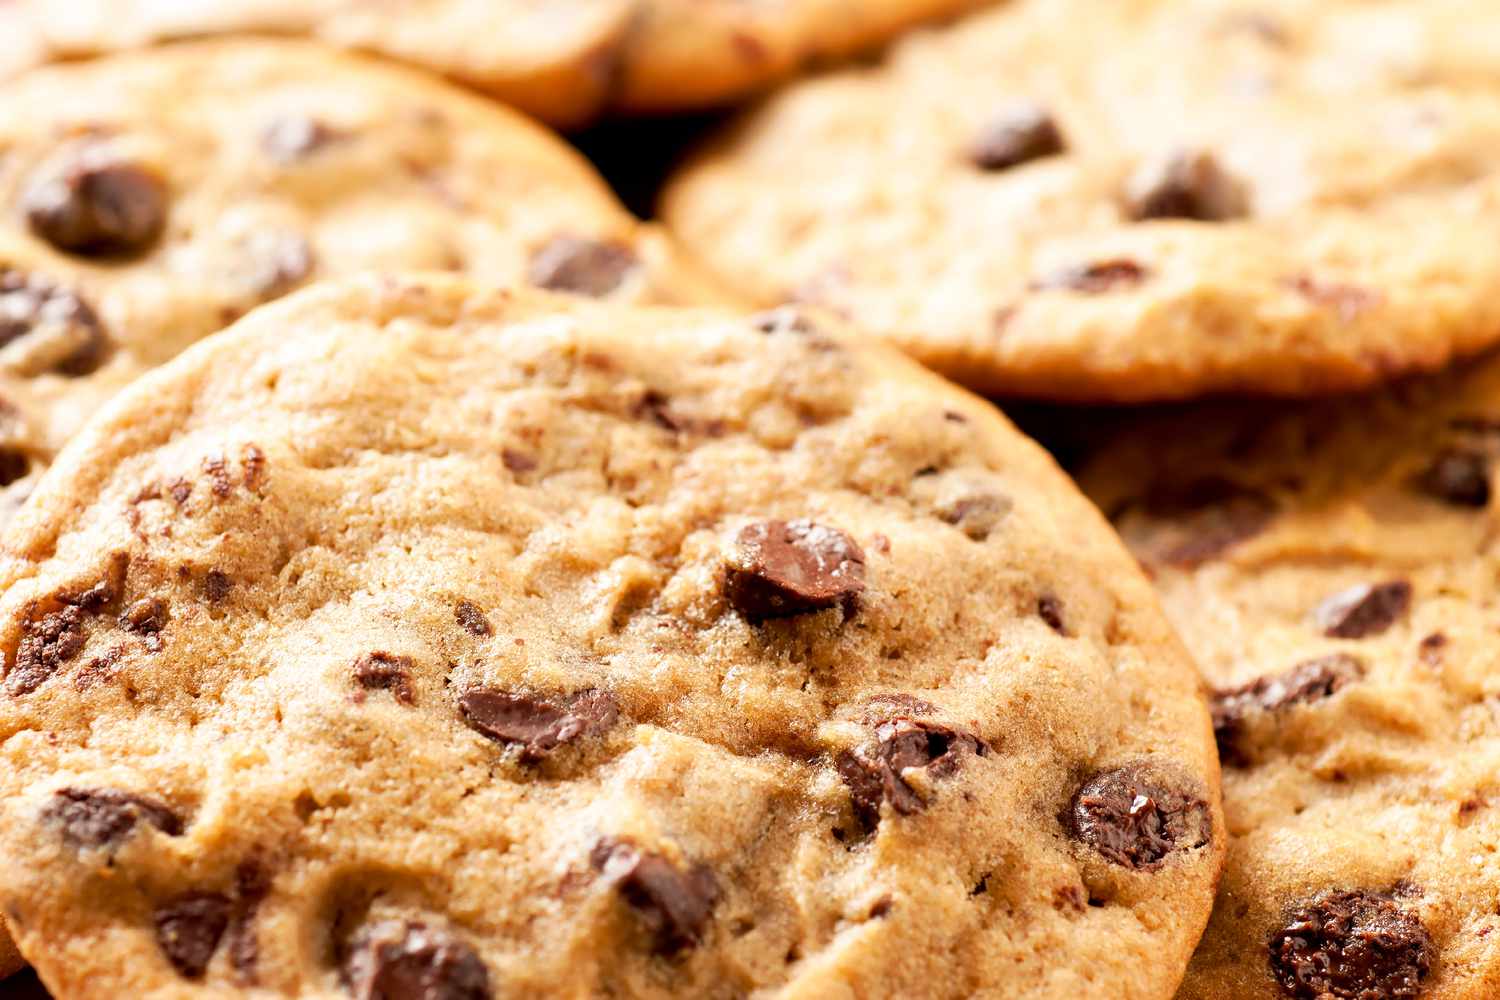 Chocolate Chip Cookie Day - Delicious Deals Await!